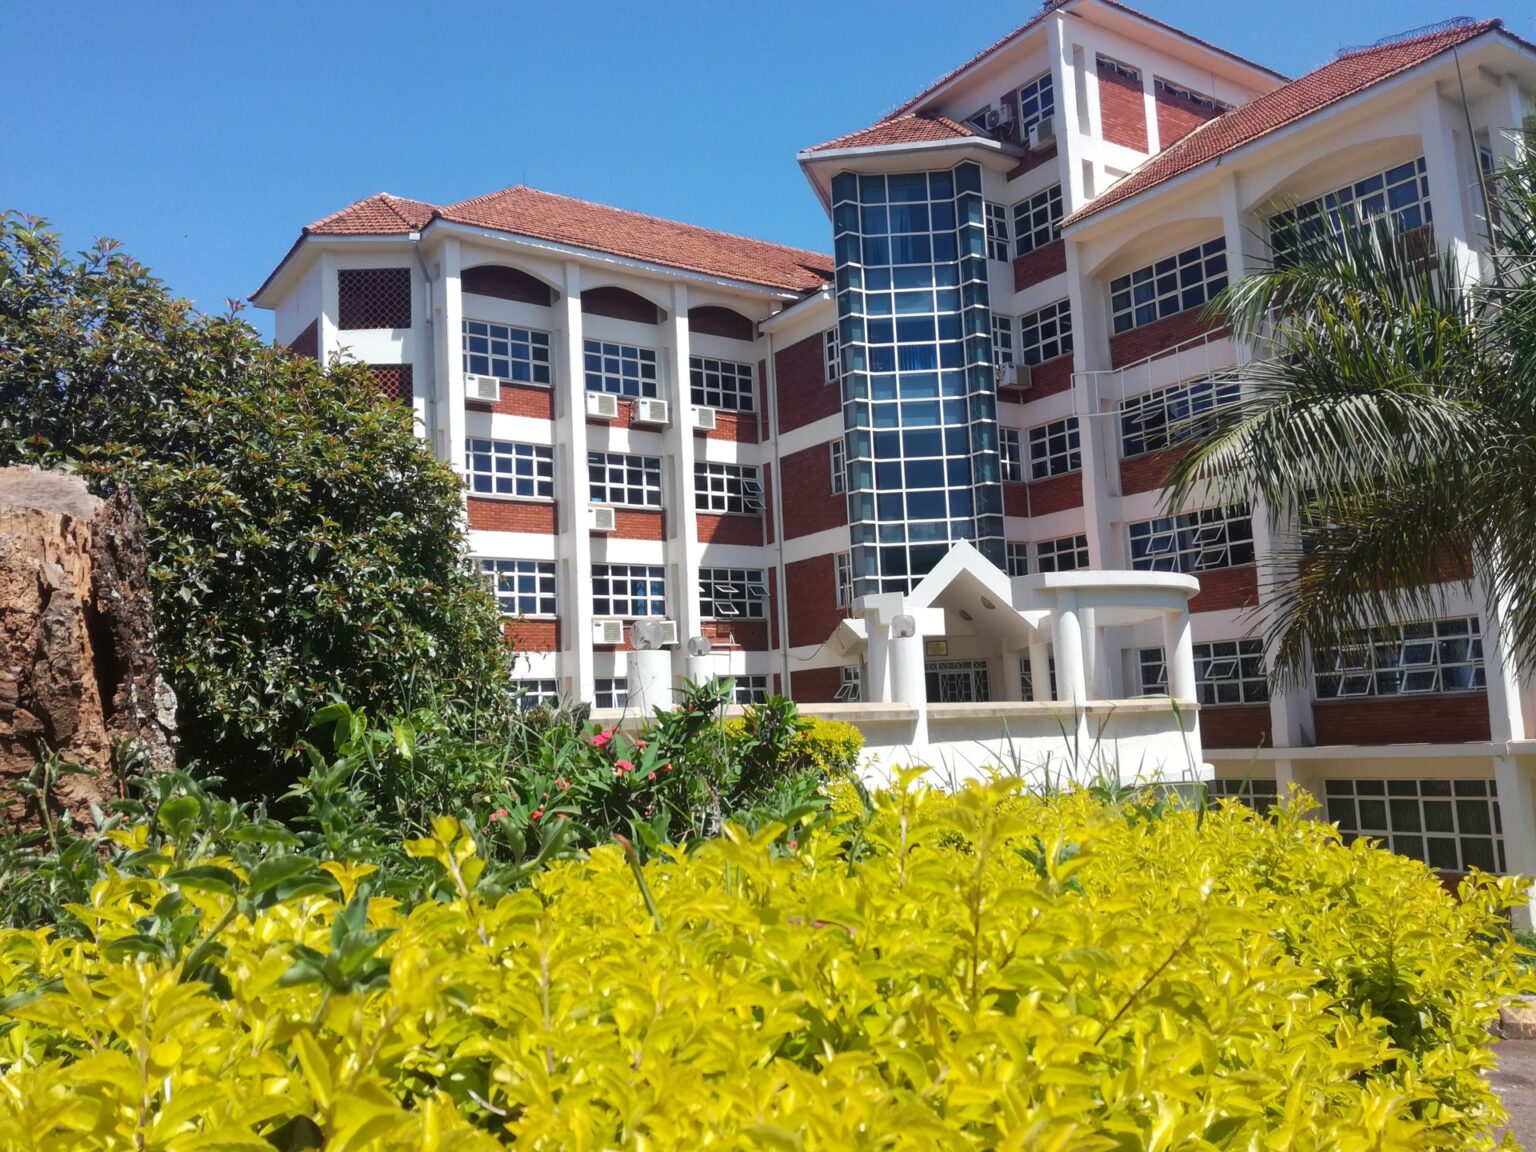 Block A of the College of Computing and Information Sciences (CoCIS), Makerere University, with foliage in the foreground, Kampala Uganda